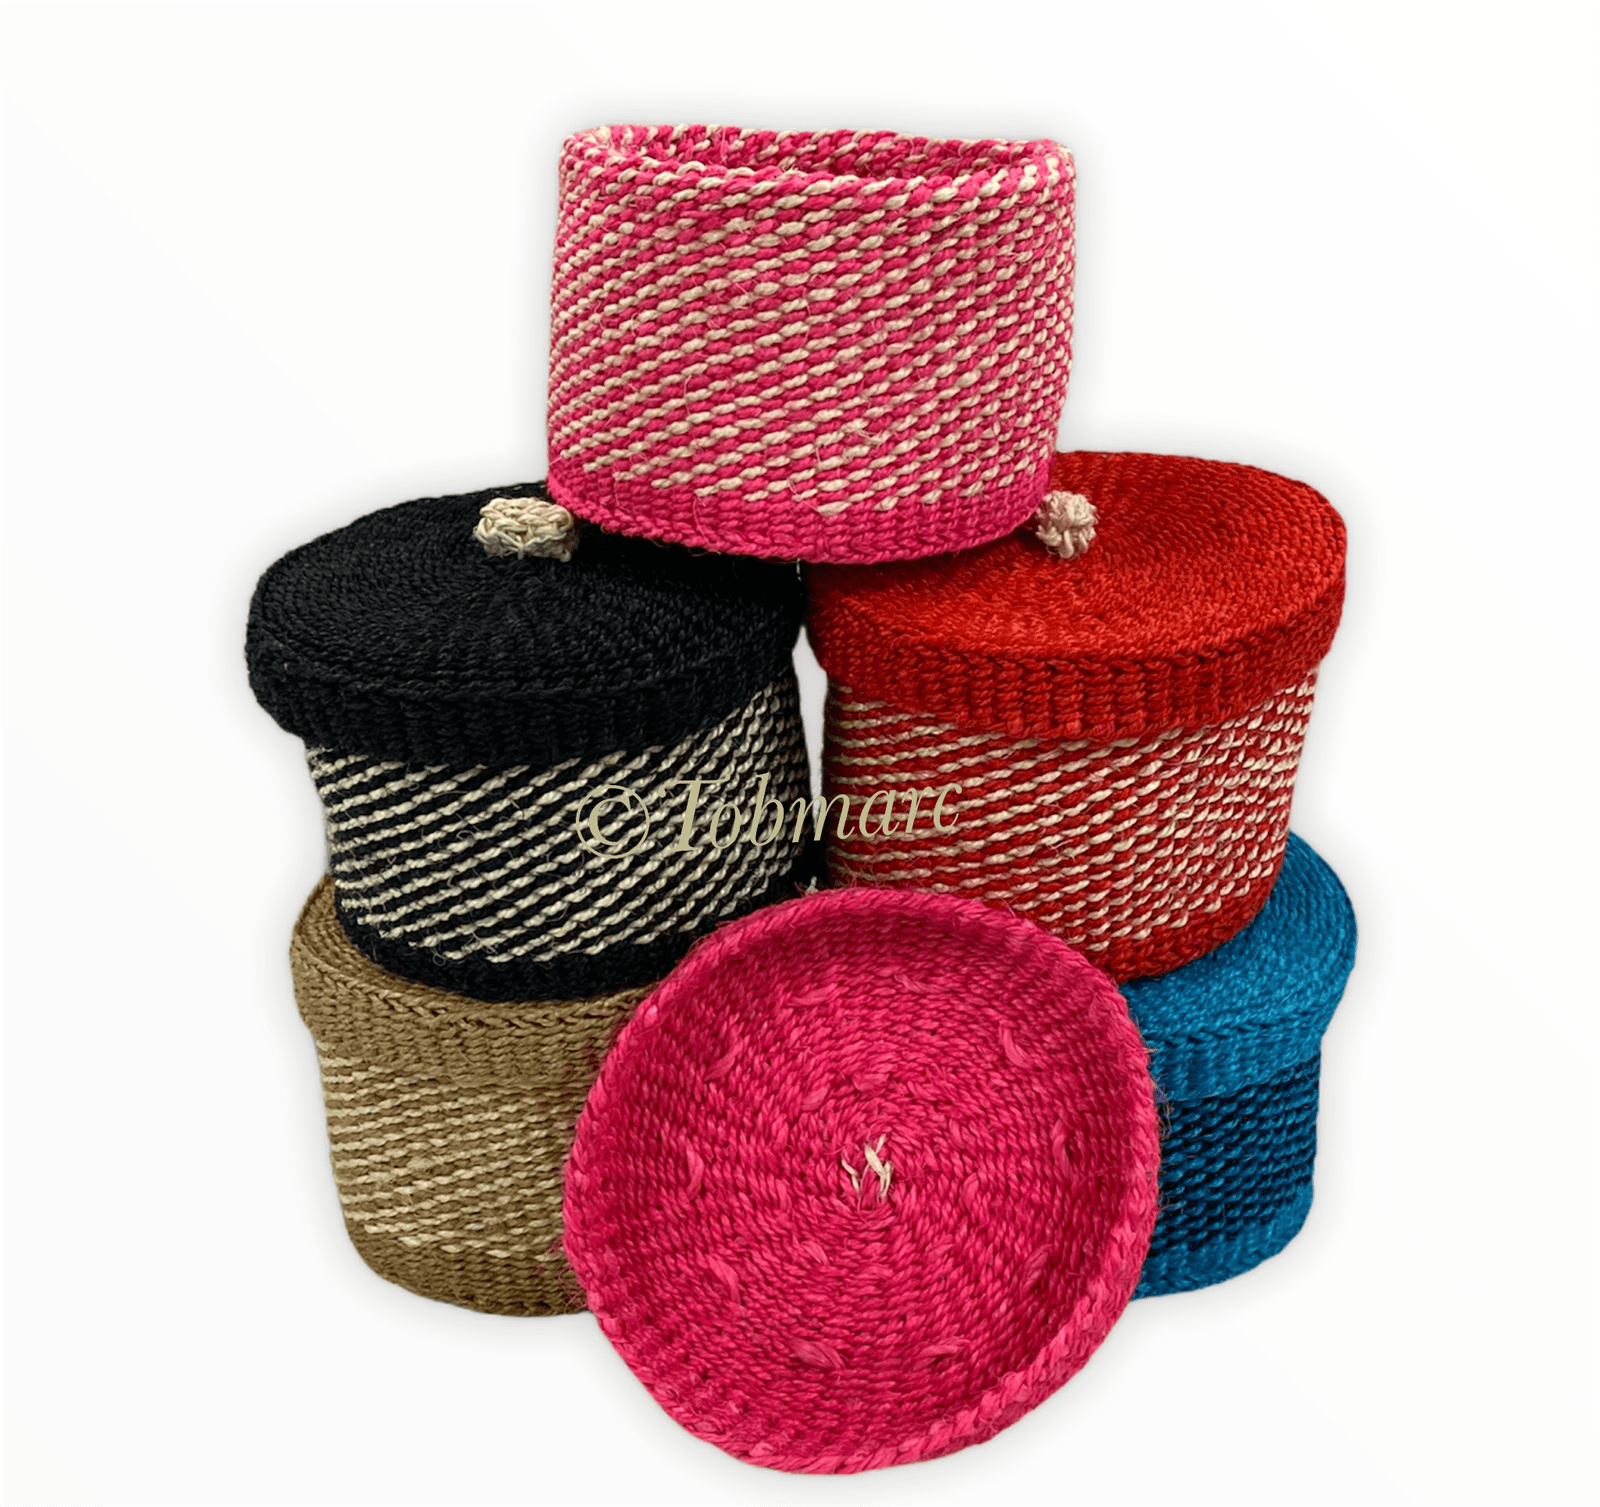 Tobmarc Home Decor & Gifts  TWIN-Small Baskets with a Lid, basket storage, Handwoven Mini Basket